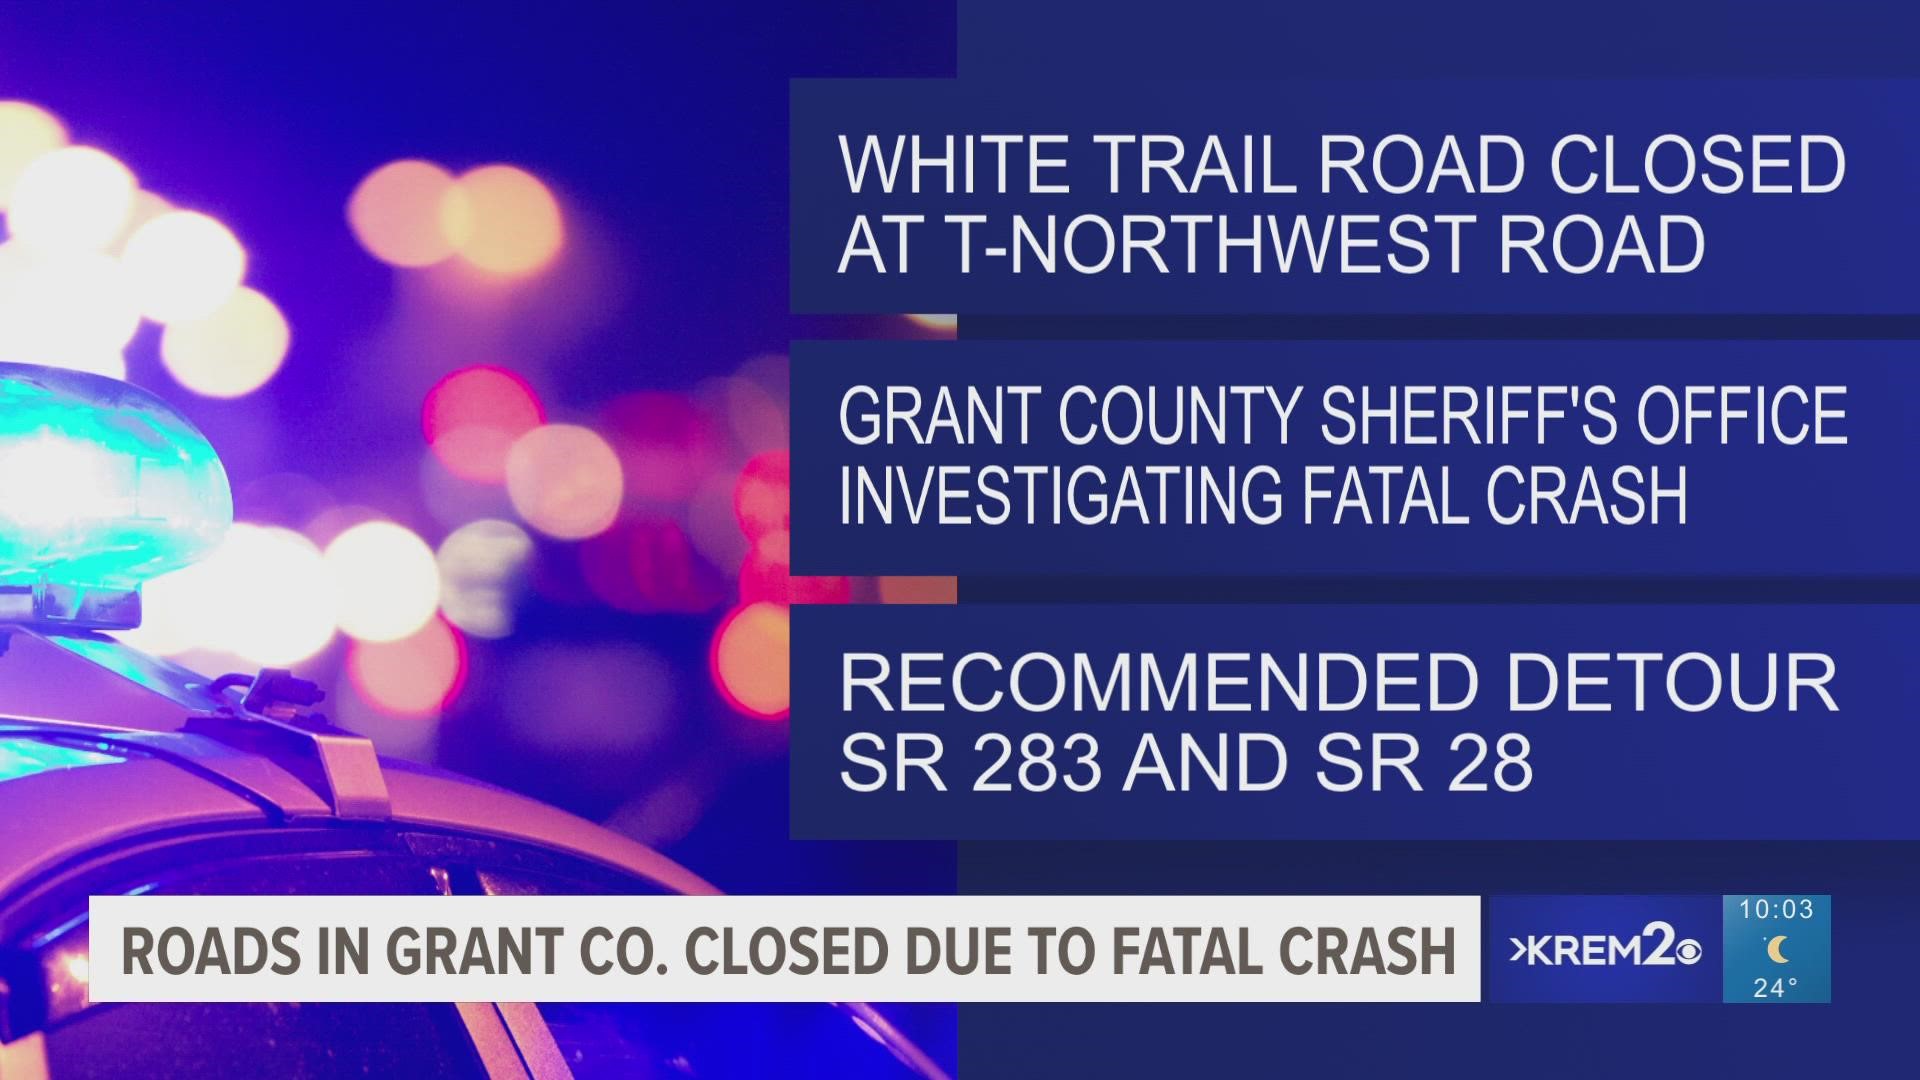 According to the Grant County Sheriff's Office, drivers in the area should use SR283 and SR 28 as detours.